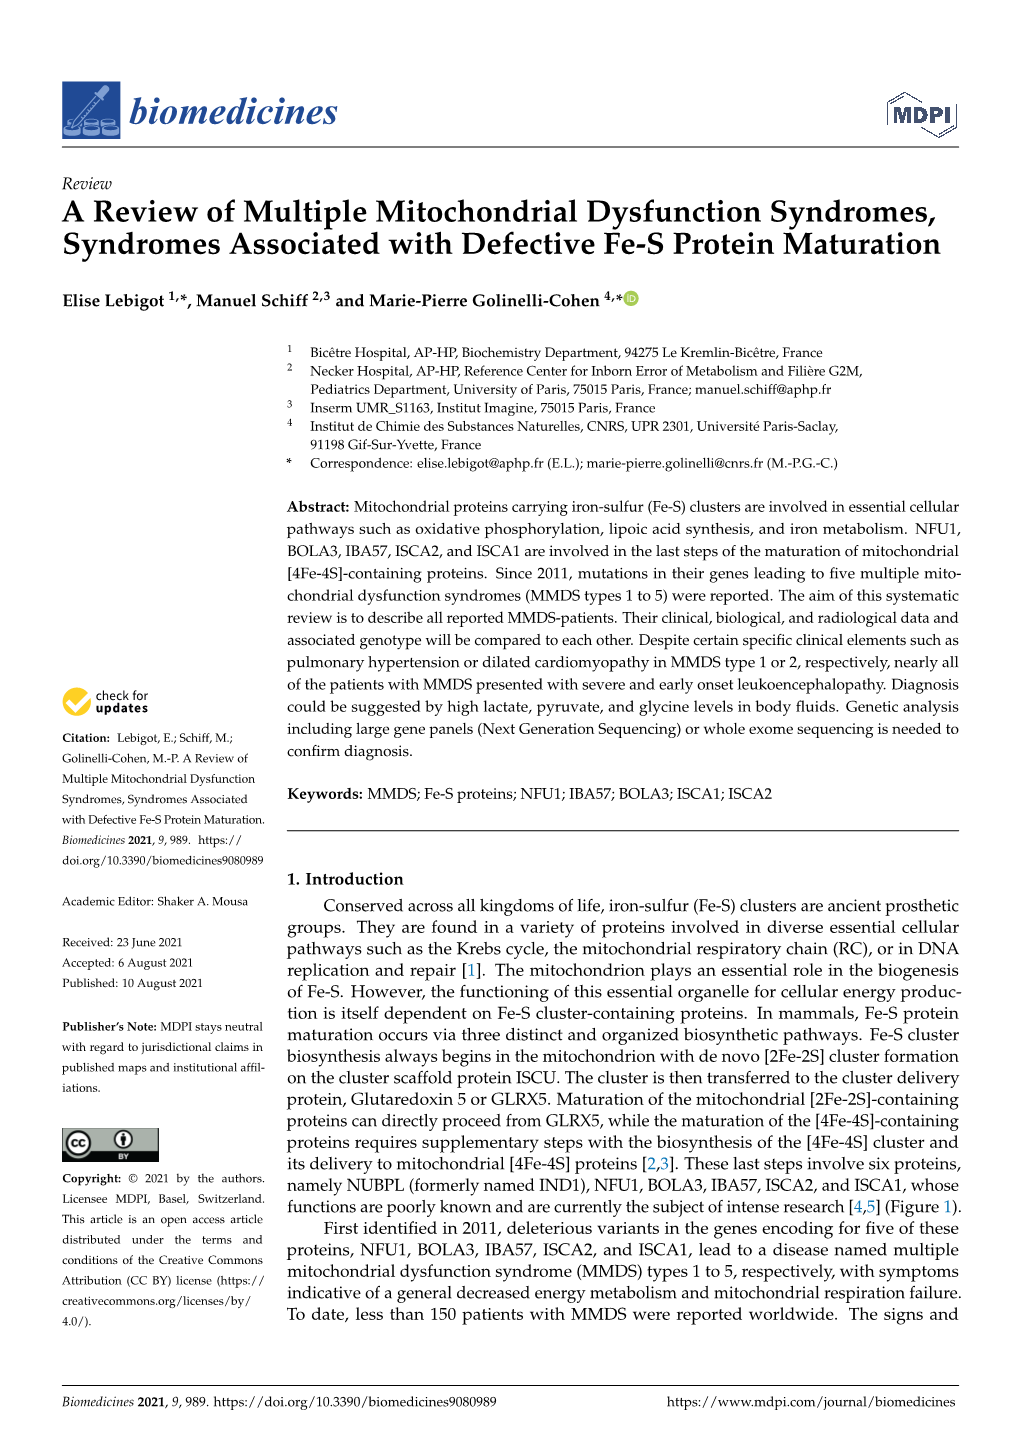 A Review of Multiple Mitochondrial Dysfunction Syndromes, Syndromes Associated with Defective Fe-S Protein Maturation